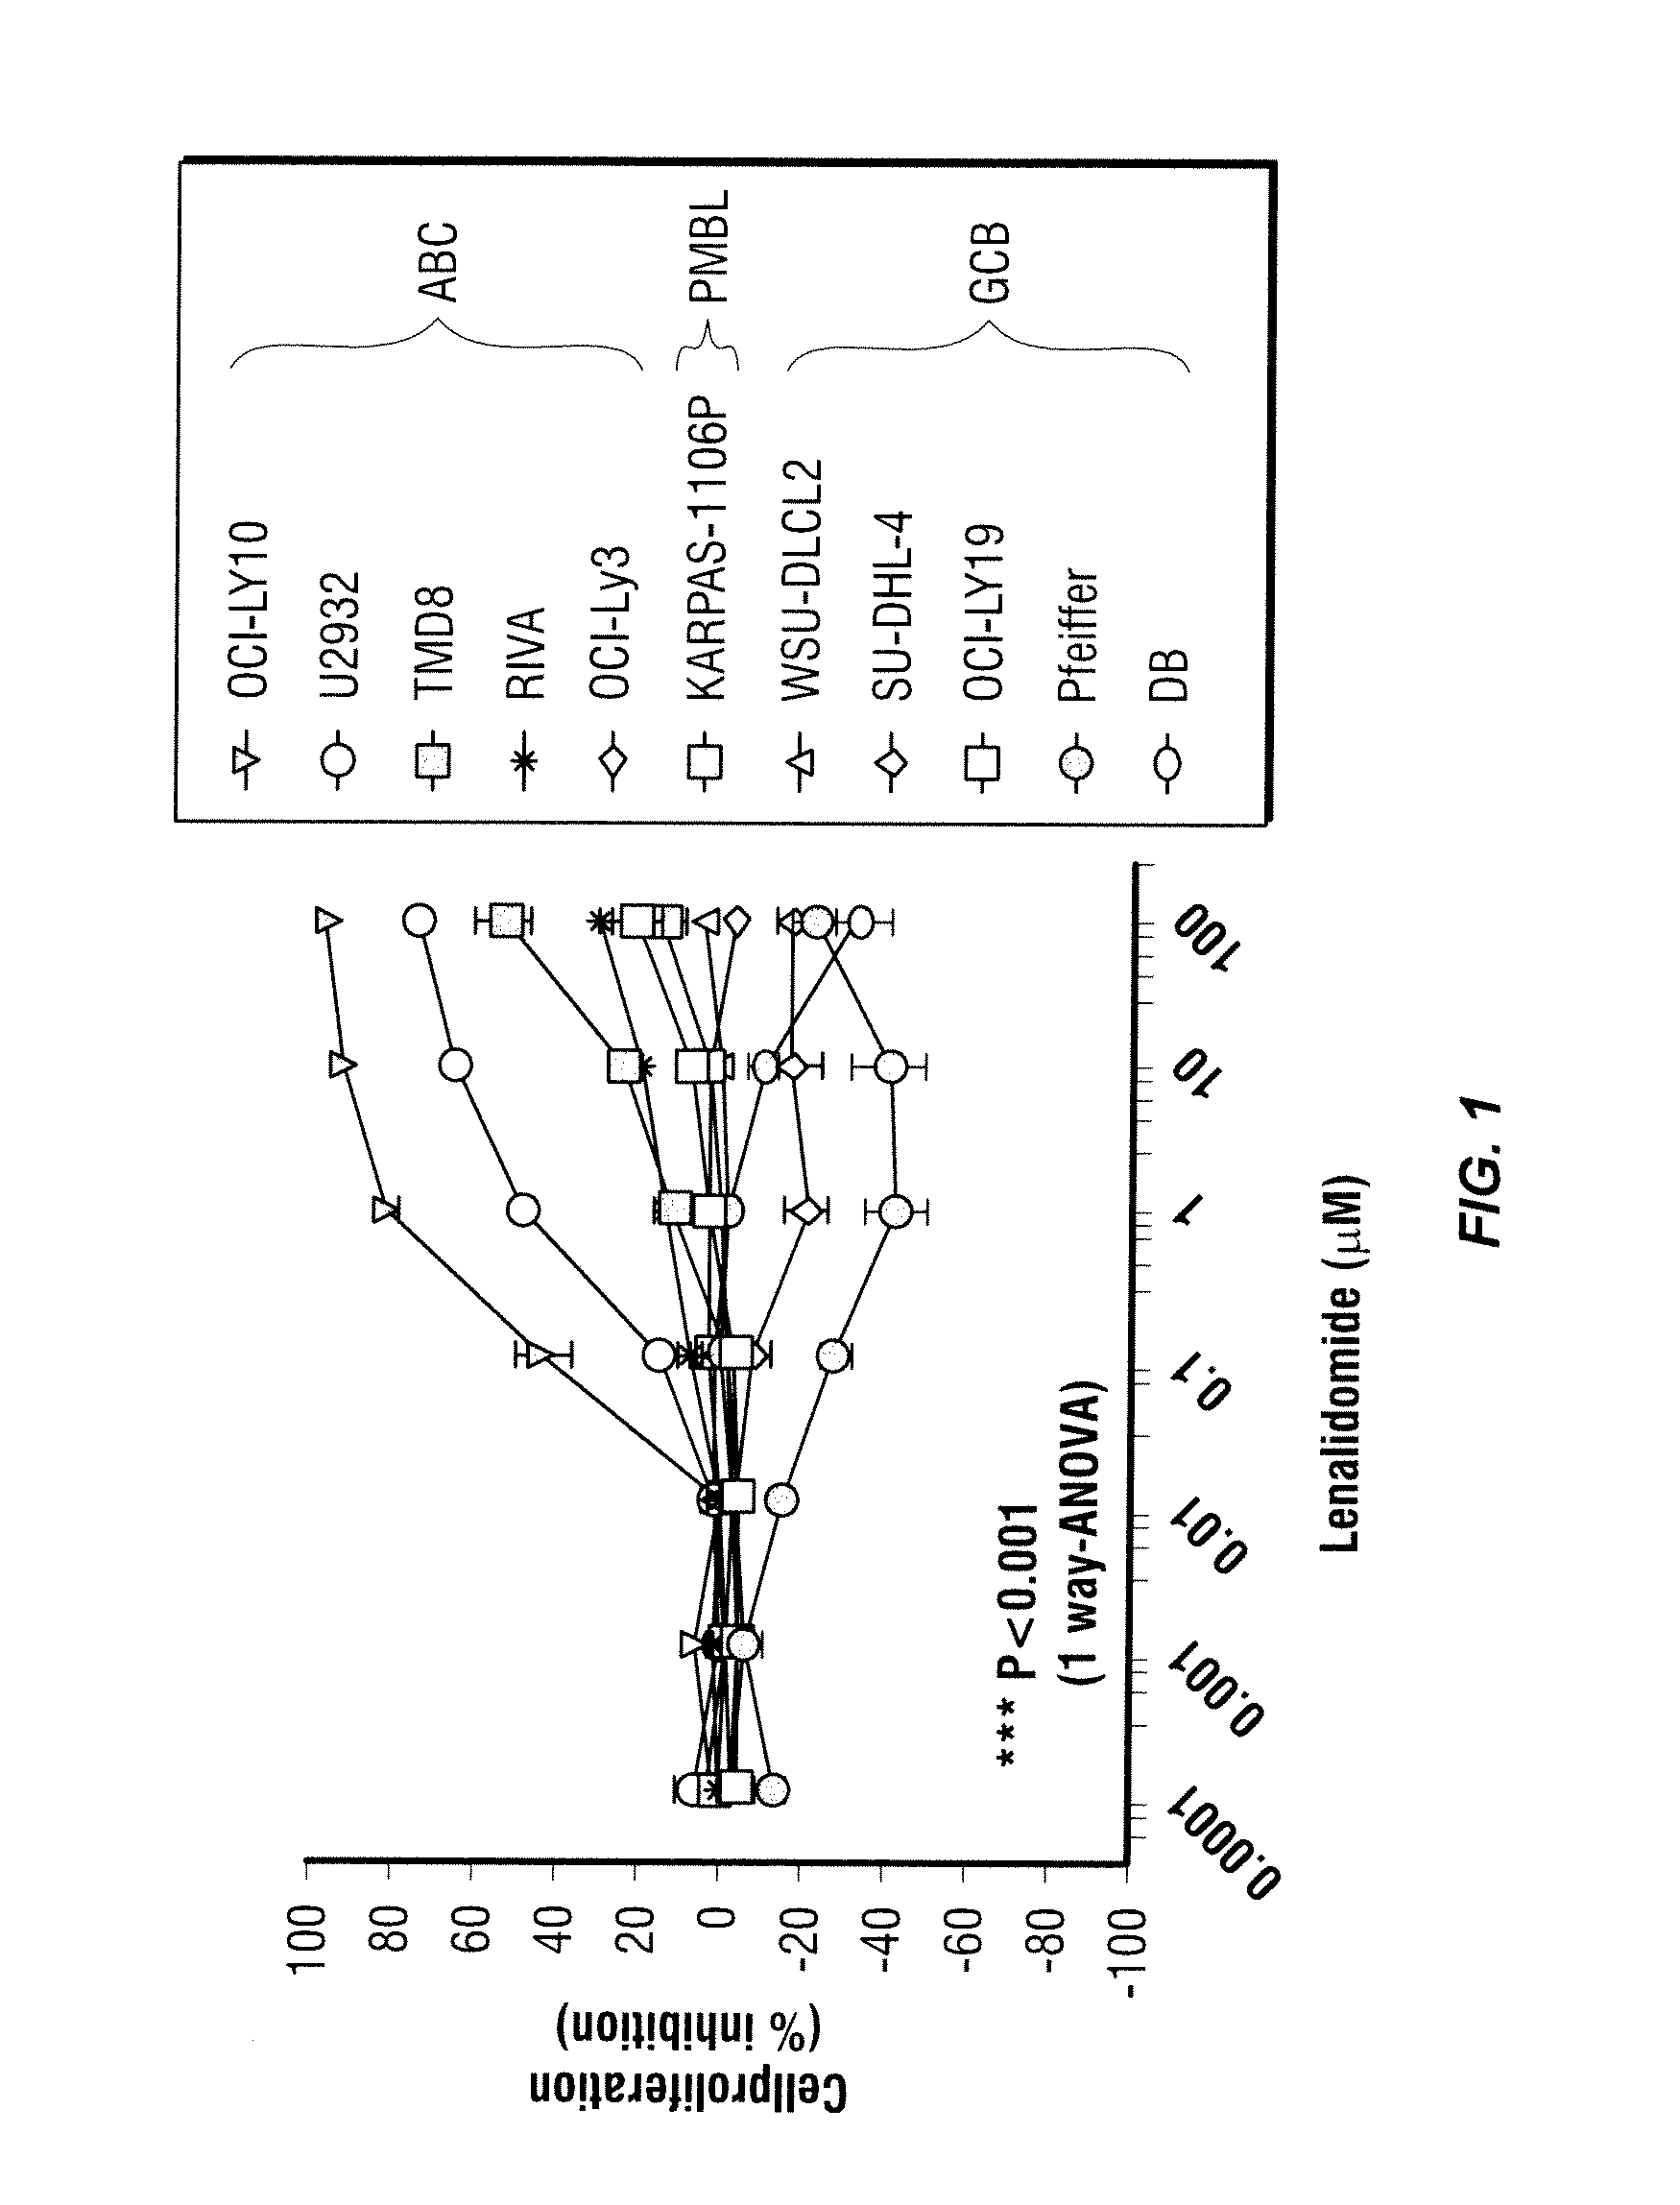 Methods for the treatment of non-hodgkin's lymphomas using lenalidomide, and gene and protein biomarkers as a predictor